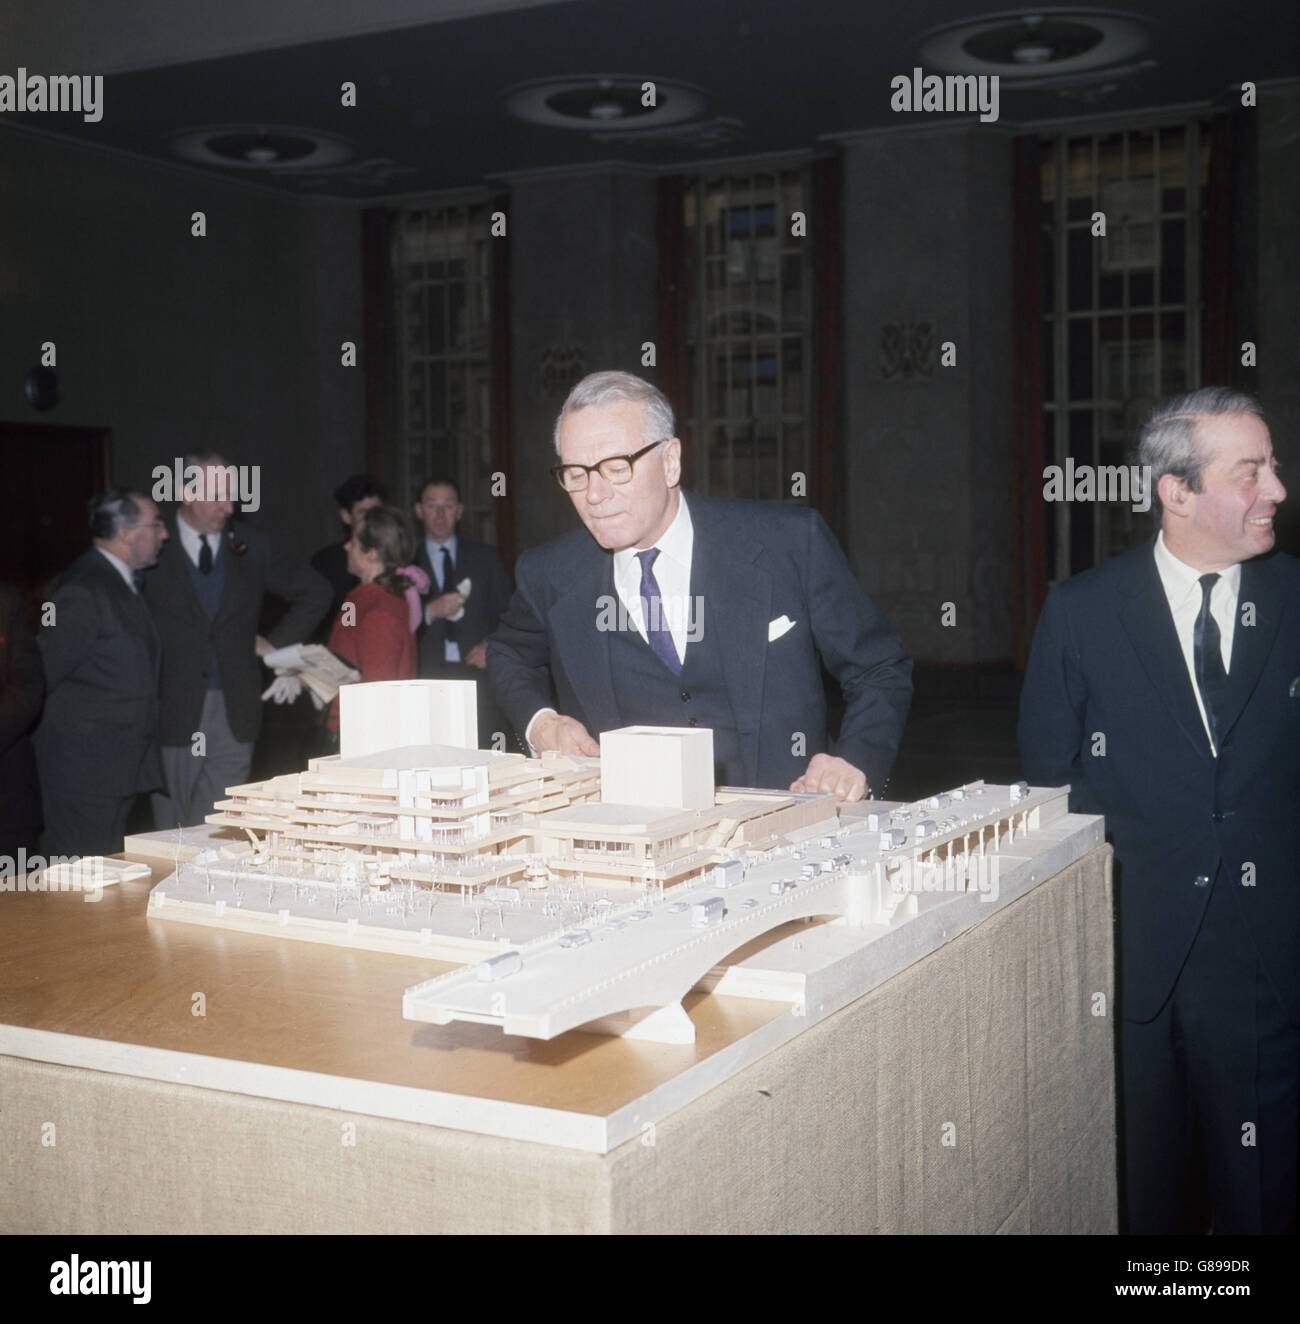 Sir Laurence Olivier, Director of the National Theatre Company, viewing a model of the new National Theatre building for the South Bank, London. Pictured right is the architect, Denys Lasdun. Stock Photo